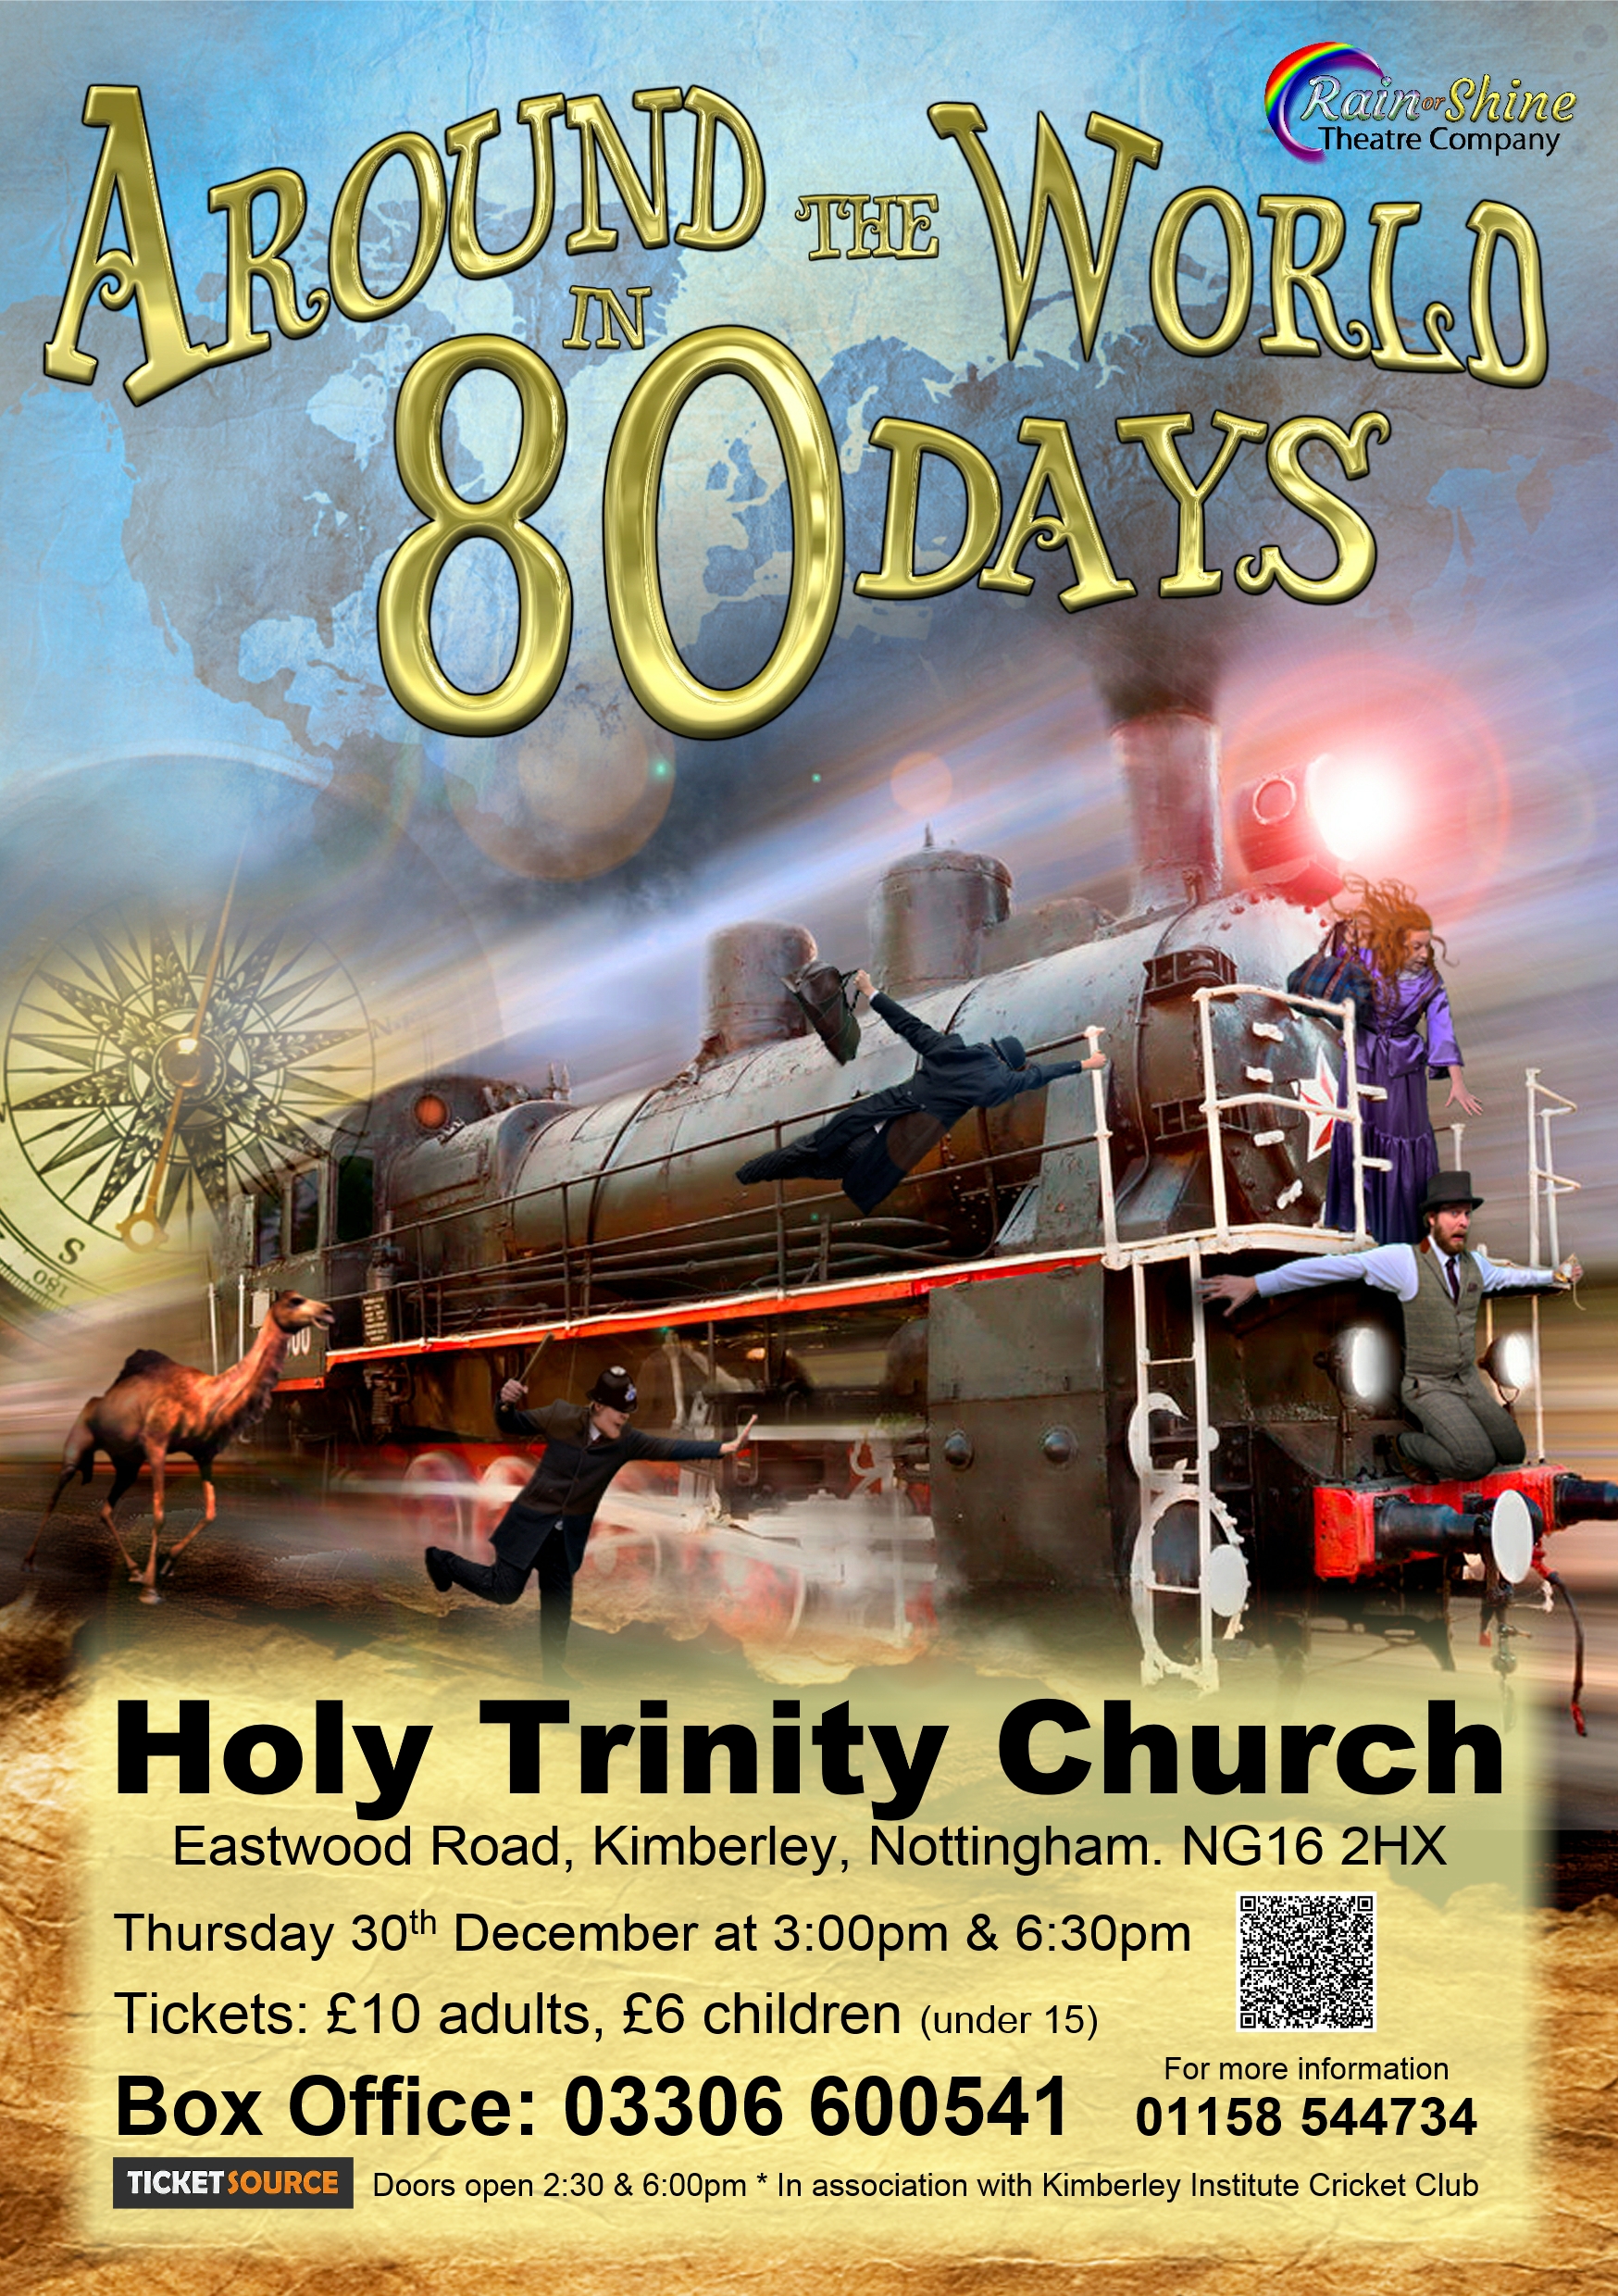 Around the World in 80 Days at Holy Trinity Church – Thursday 30th December